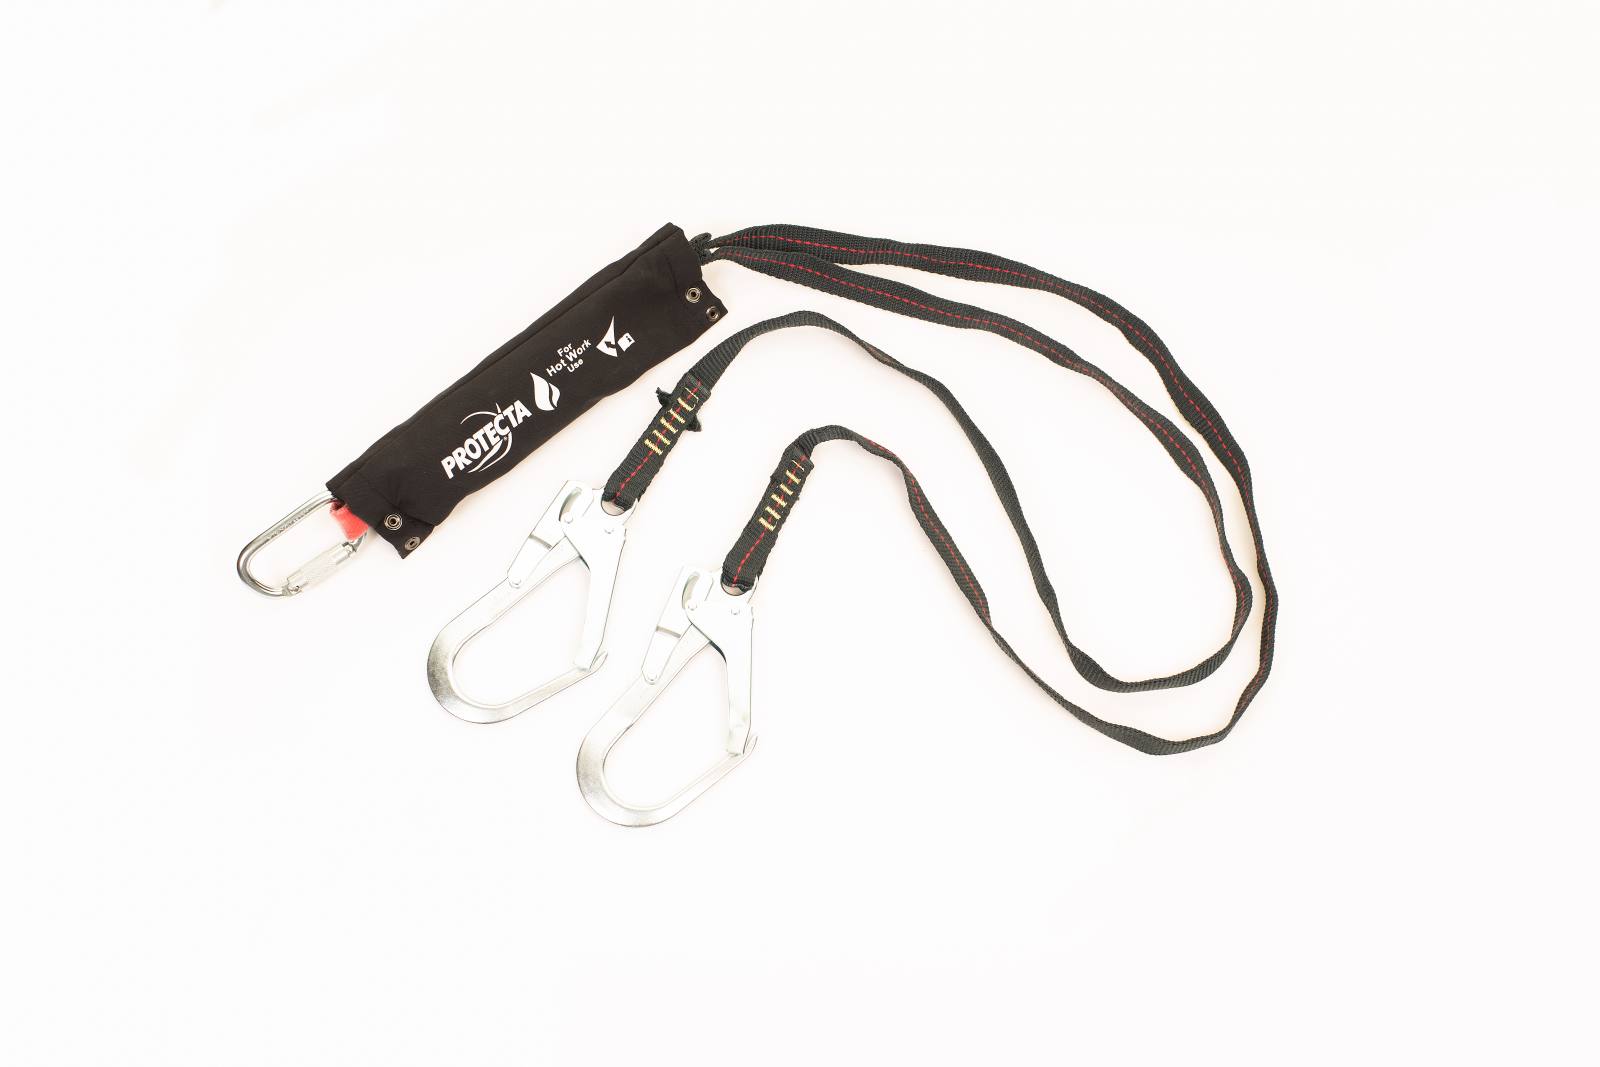 3M PROTECTA Pro heat-resistant Y-connector with strap shock absorber, length: 2 m, heat-resistant up to 371 Â°C, AJ514 Twist-Lock steel carabiner opening width 17 mm and 2 pieces of AJ595 steel pipe hooks opening width 50 mm, 2.0 m